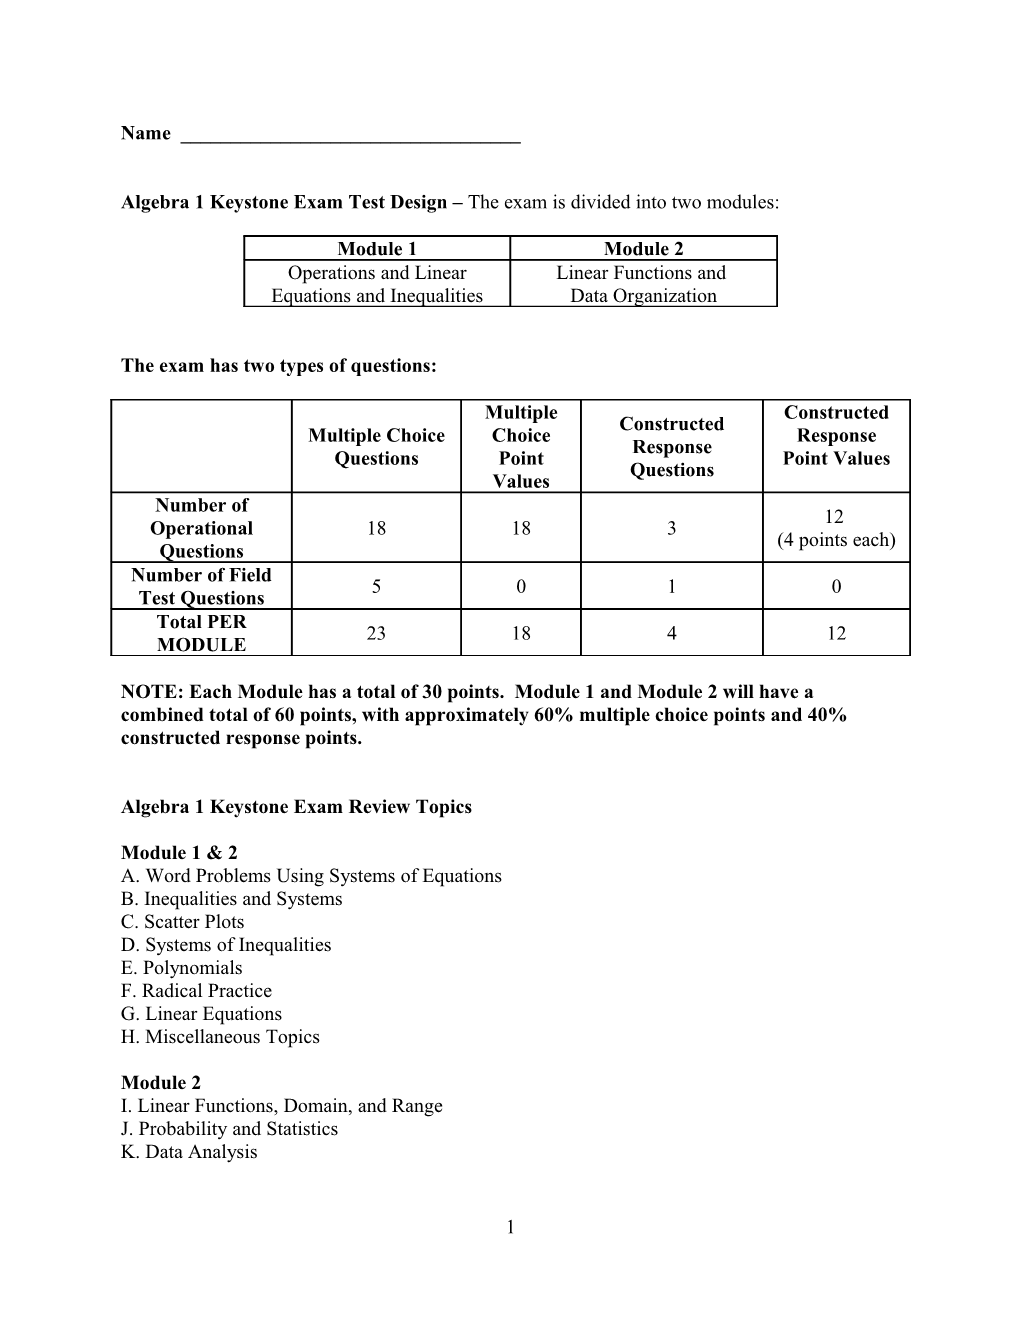 Algebra 1 Keystone Exam Test Design the Exam Is Divided Into Two Modules